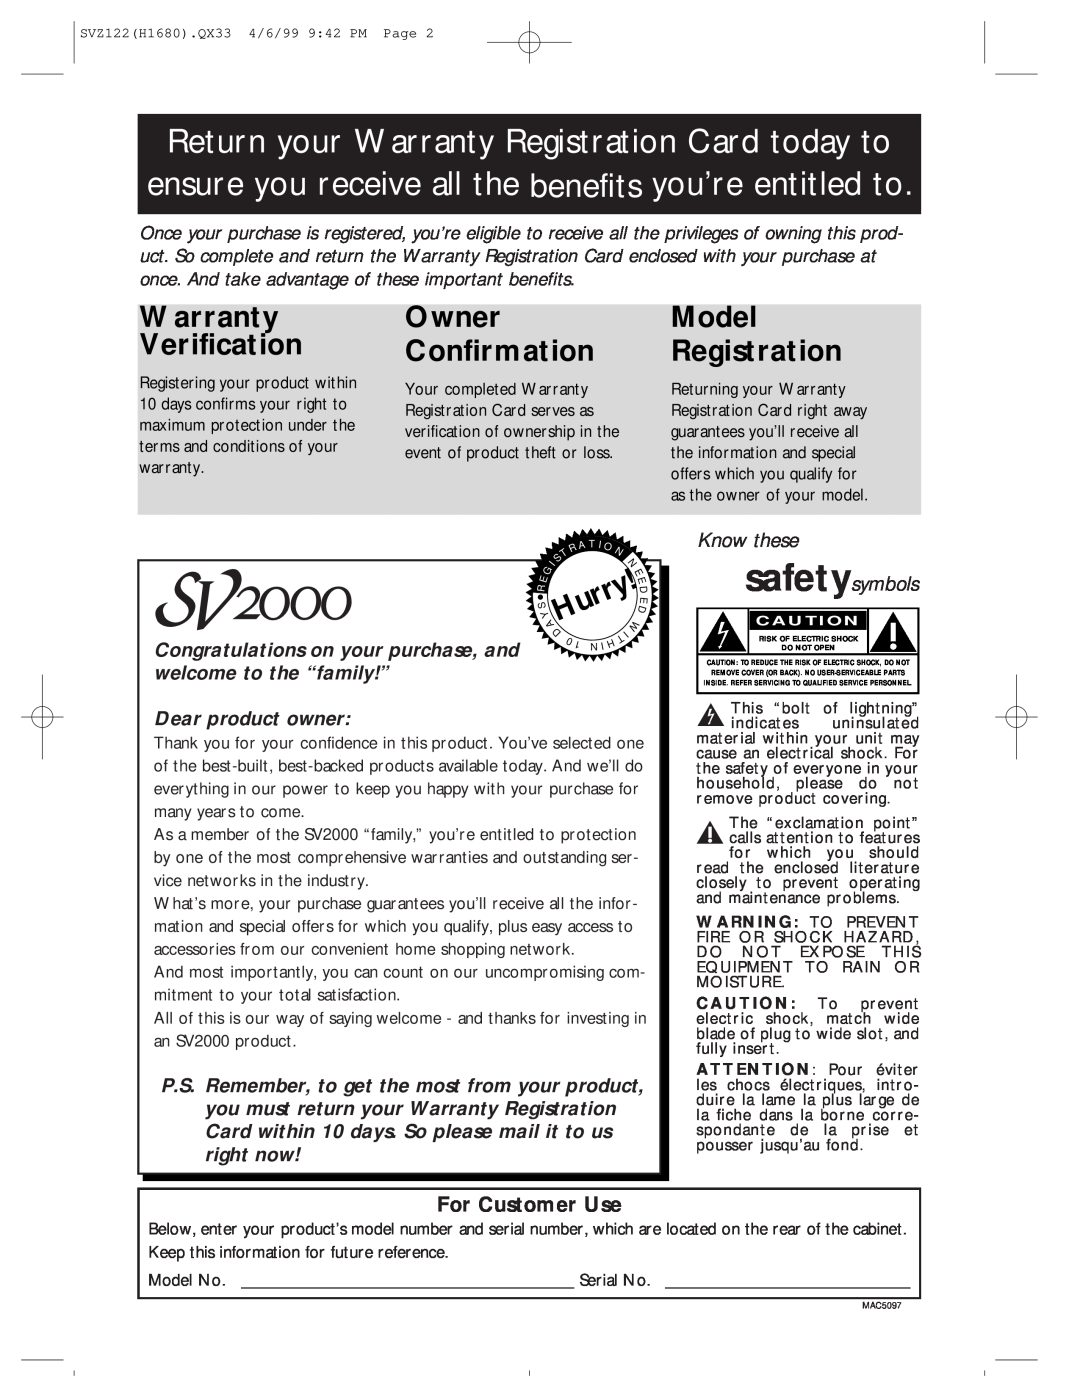 Philips SVZ122 owner manual Warranty Verification, Owner Confirmation, Model Registration, AHurry, Know these safetysymbols 